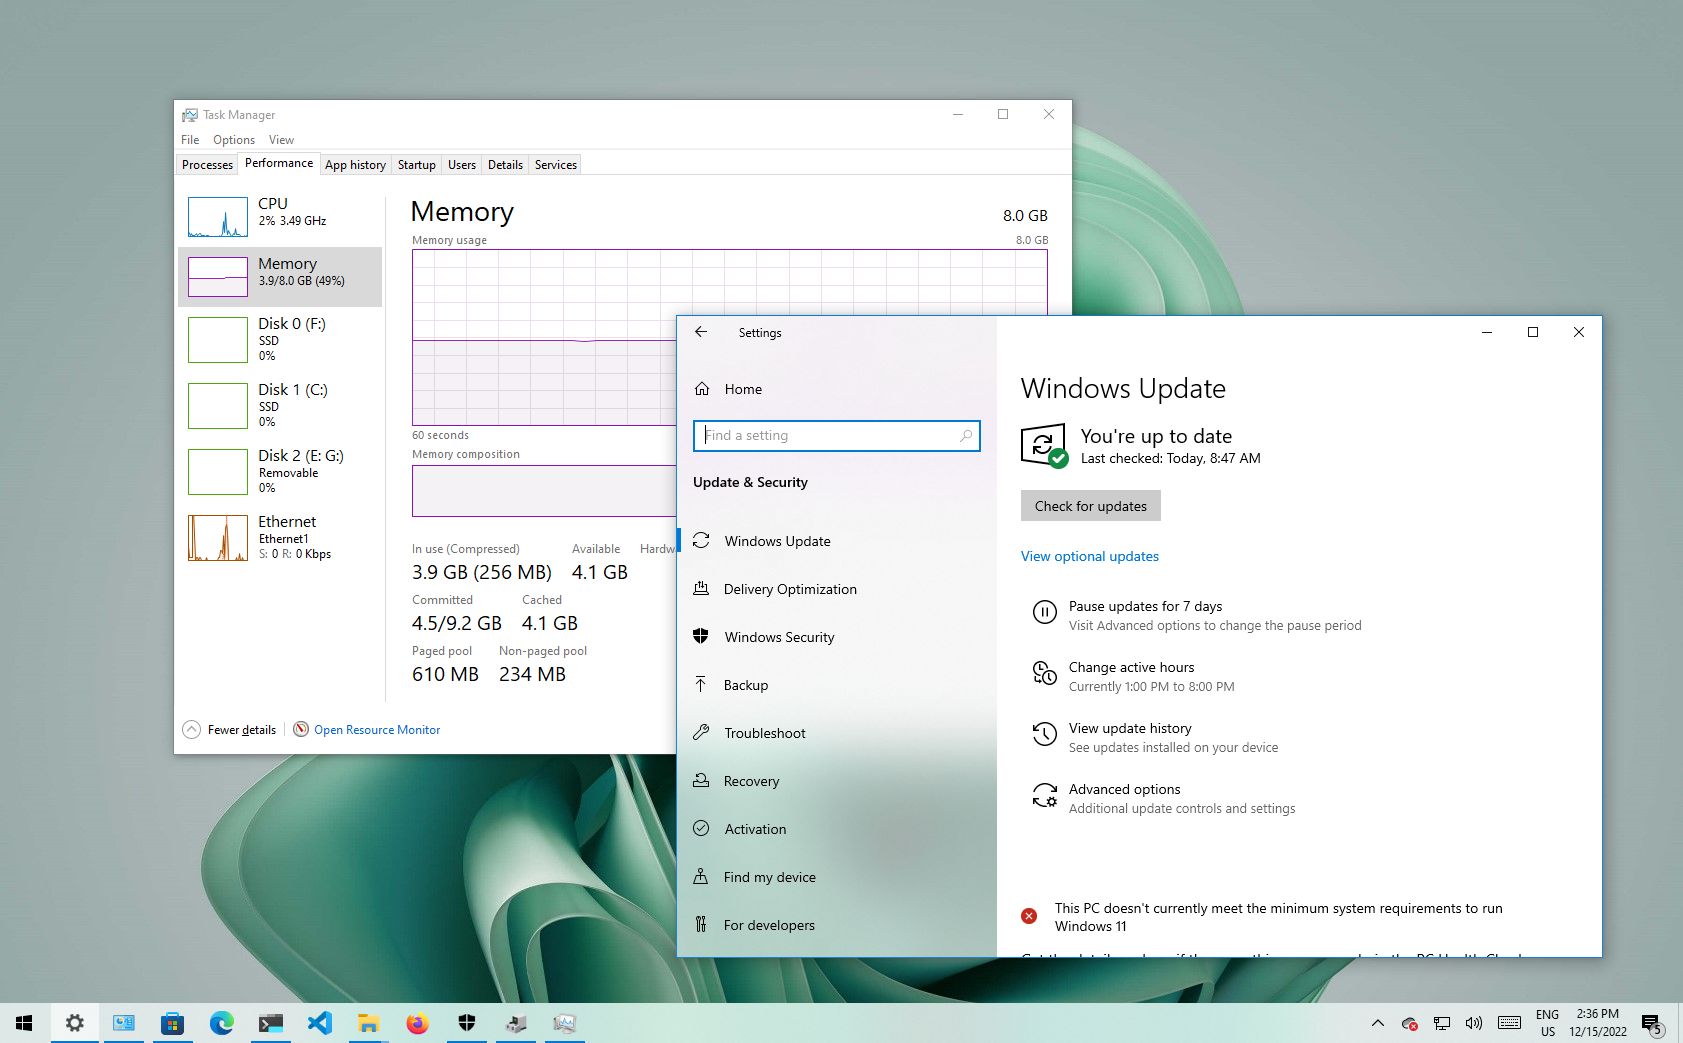 20 tips and tricks to increase PC performance on Windows 10 | Windows Central